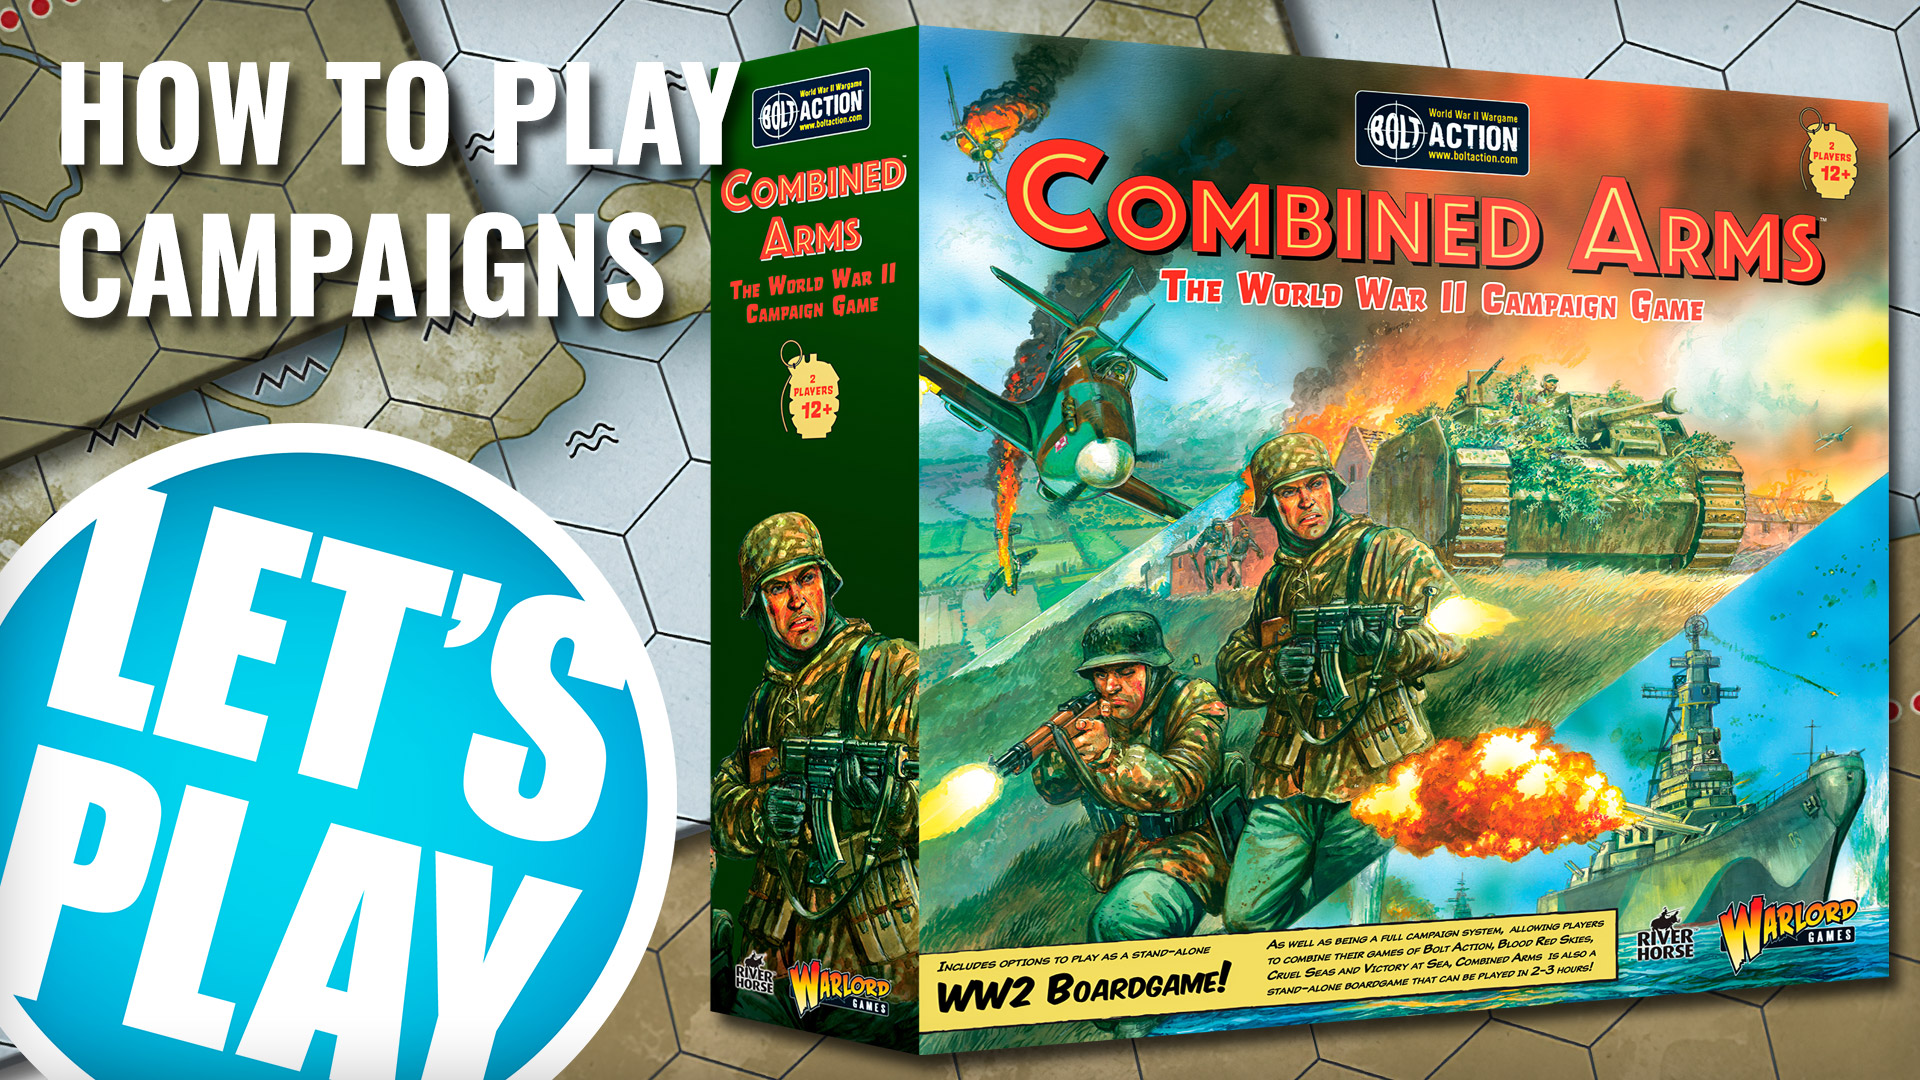 Let's-Play-Combined-Arms-Campaign-Game-coverimage